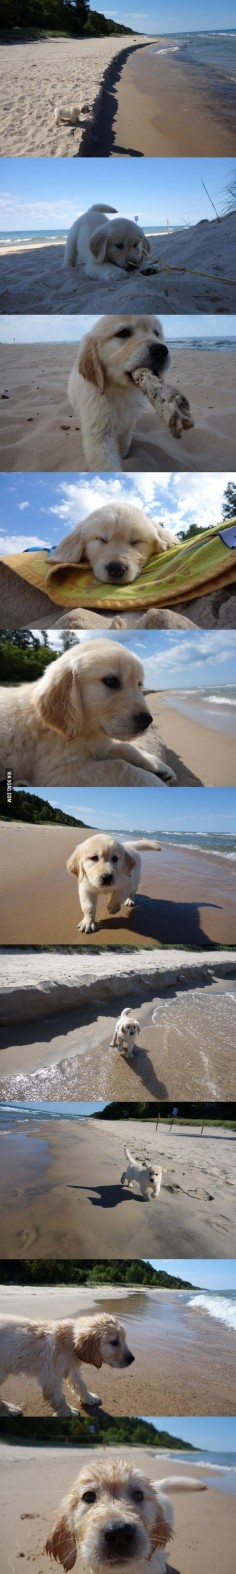 First trip to the beach? That's golden.